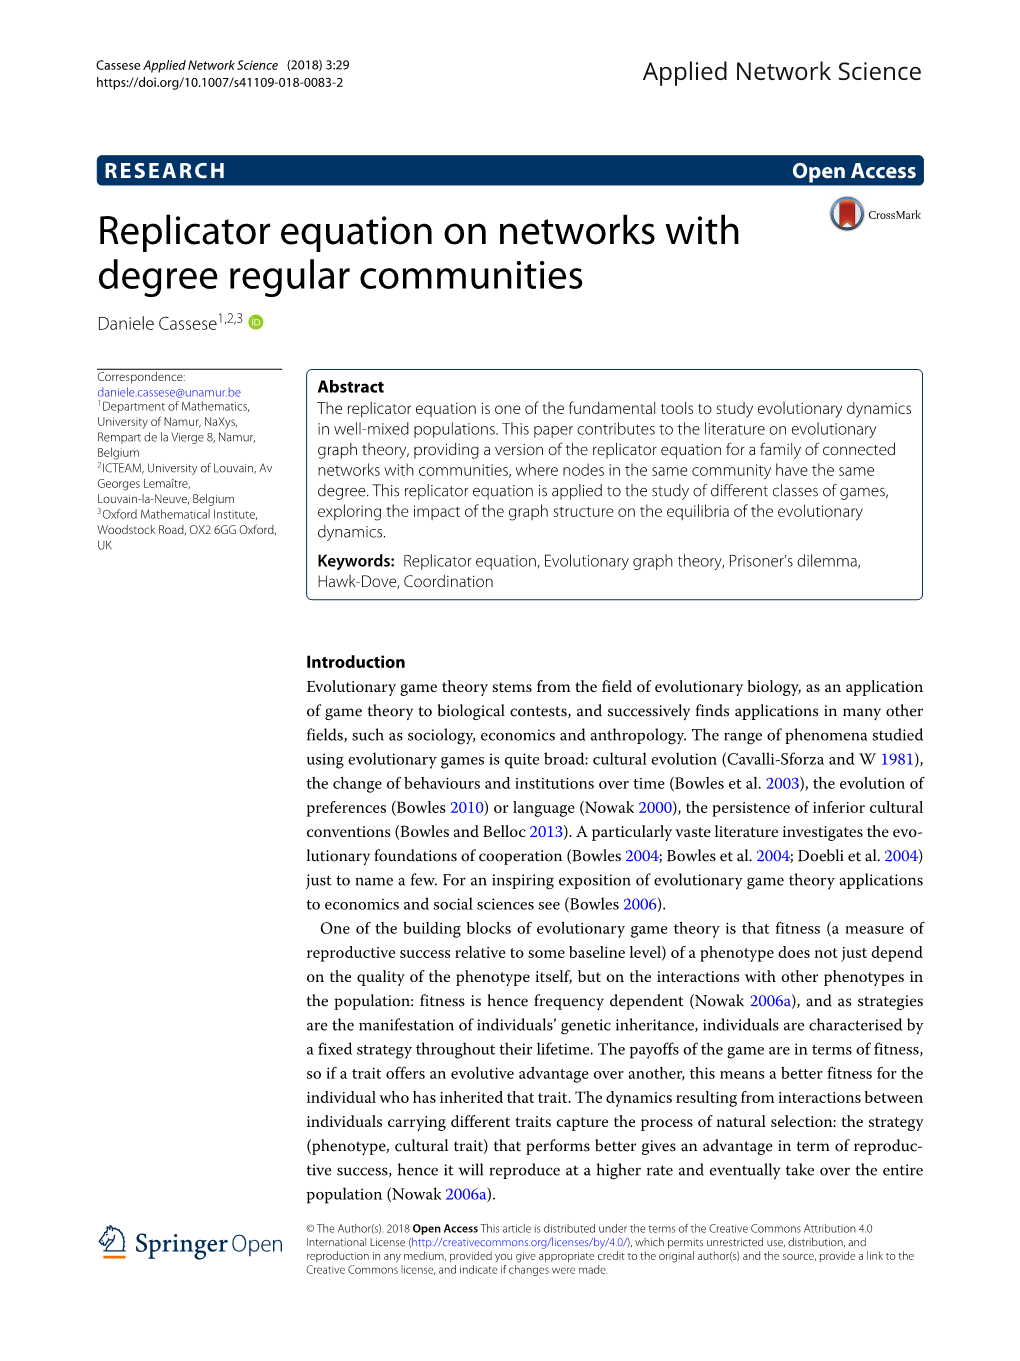 Replicator Equation on Networks with Degree Regular Communities Daniele Cassese1,2,3